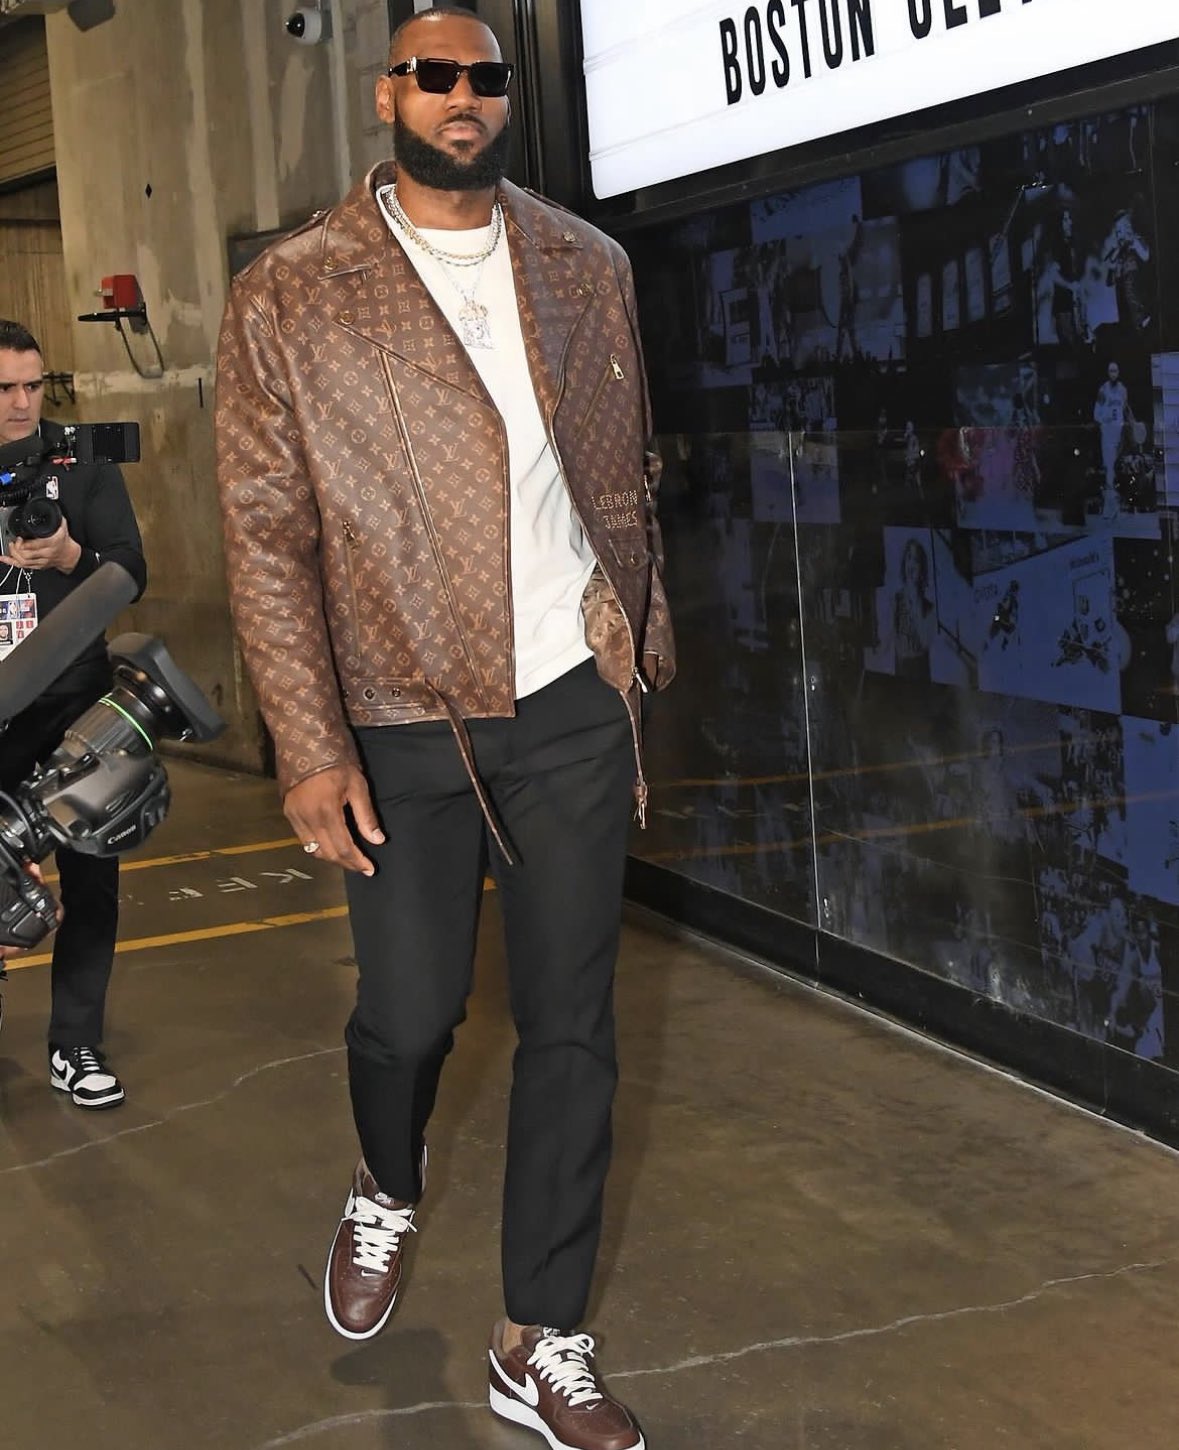 Runway to Court: LeBron James’ Christmas Fashion Statement with Louis Vuitton